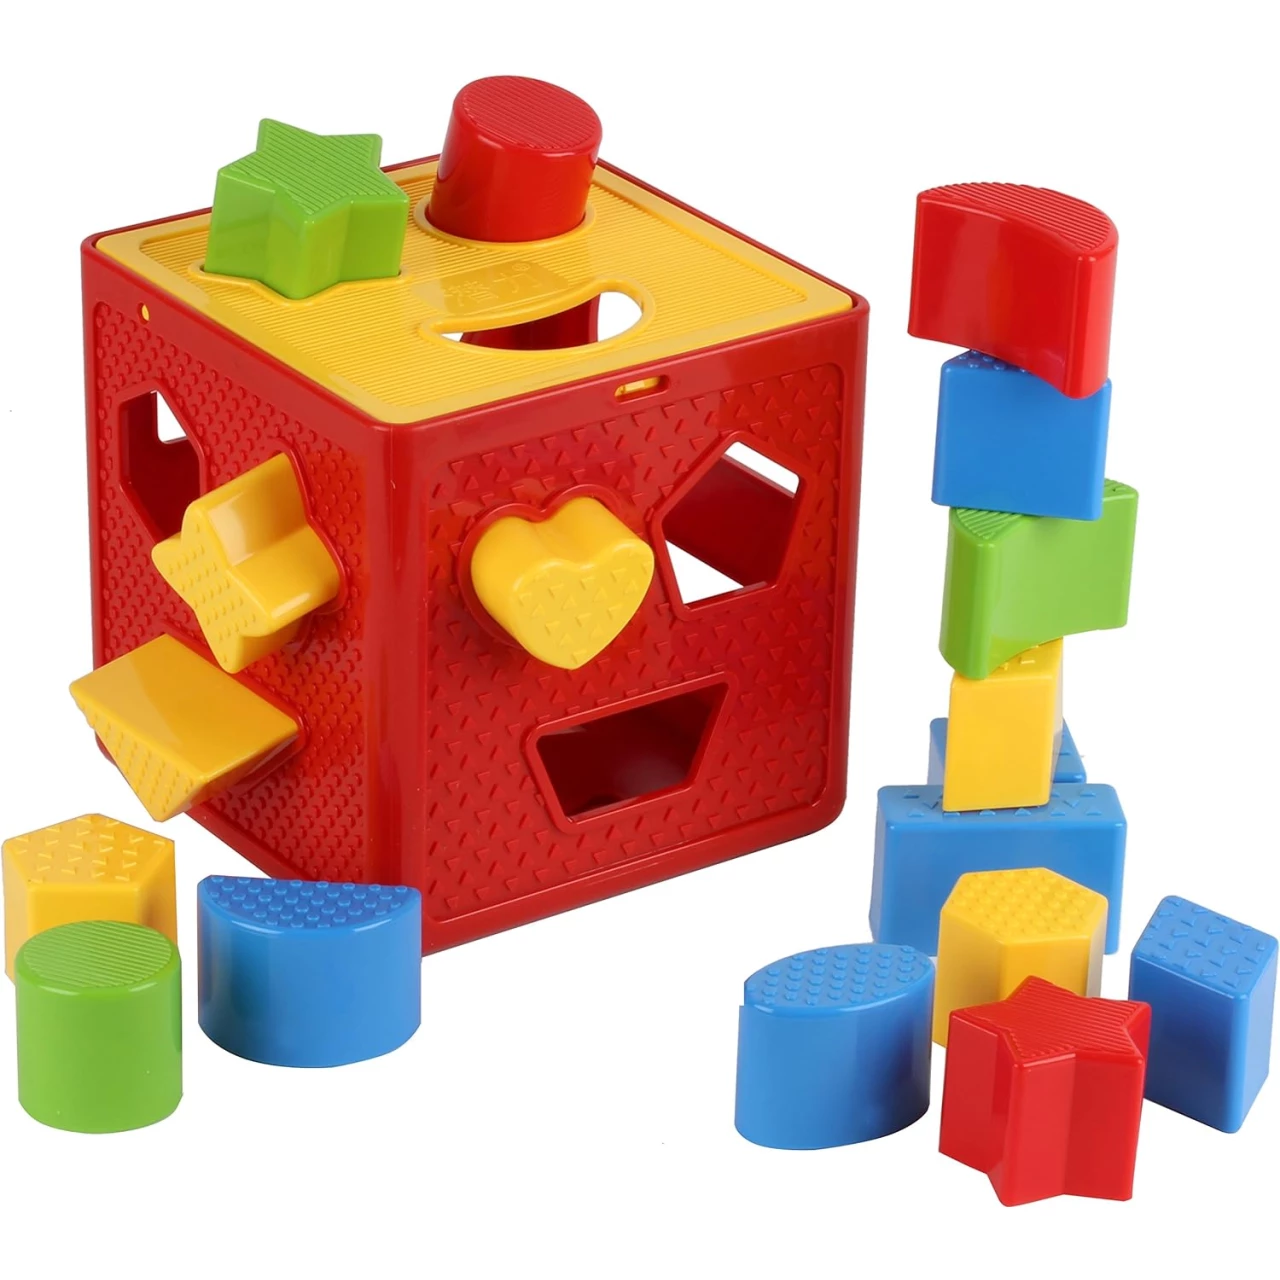 Play22 Baby Blocks Shape Sorter Toy - Childrens Blocks Includes 18 Shapes